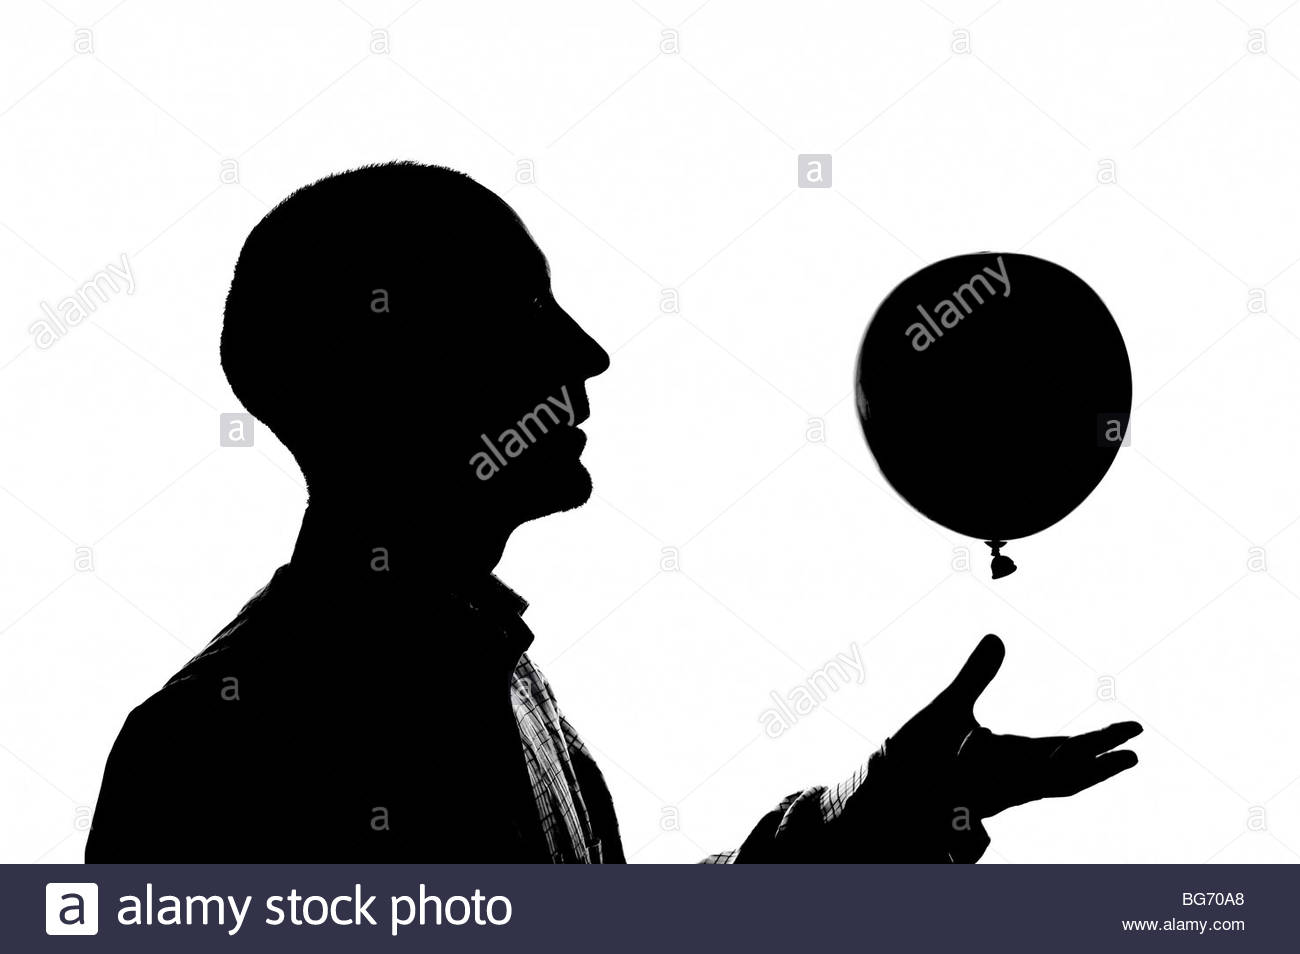 Silhouetted man with balloon Stock Photo